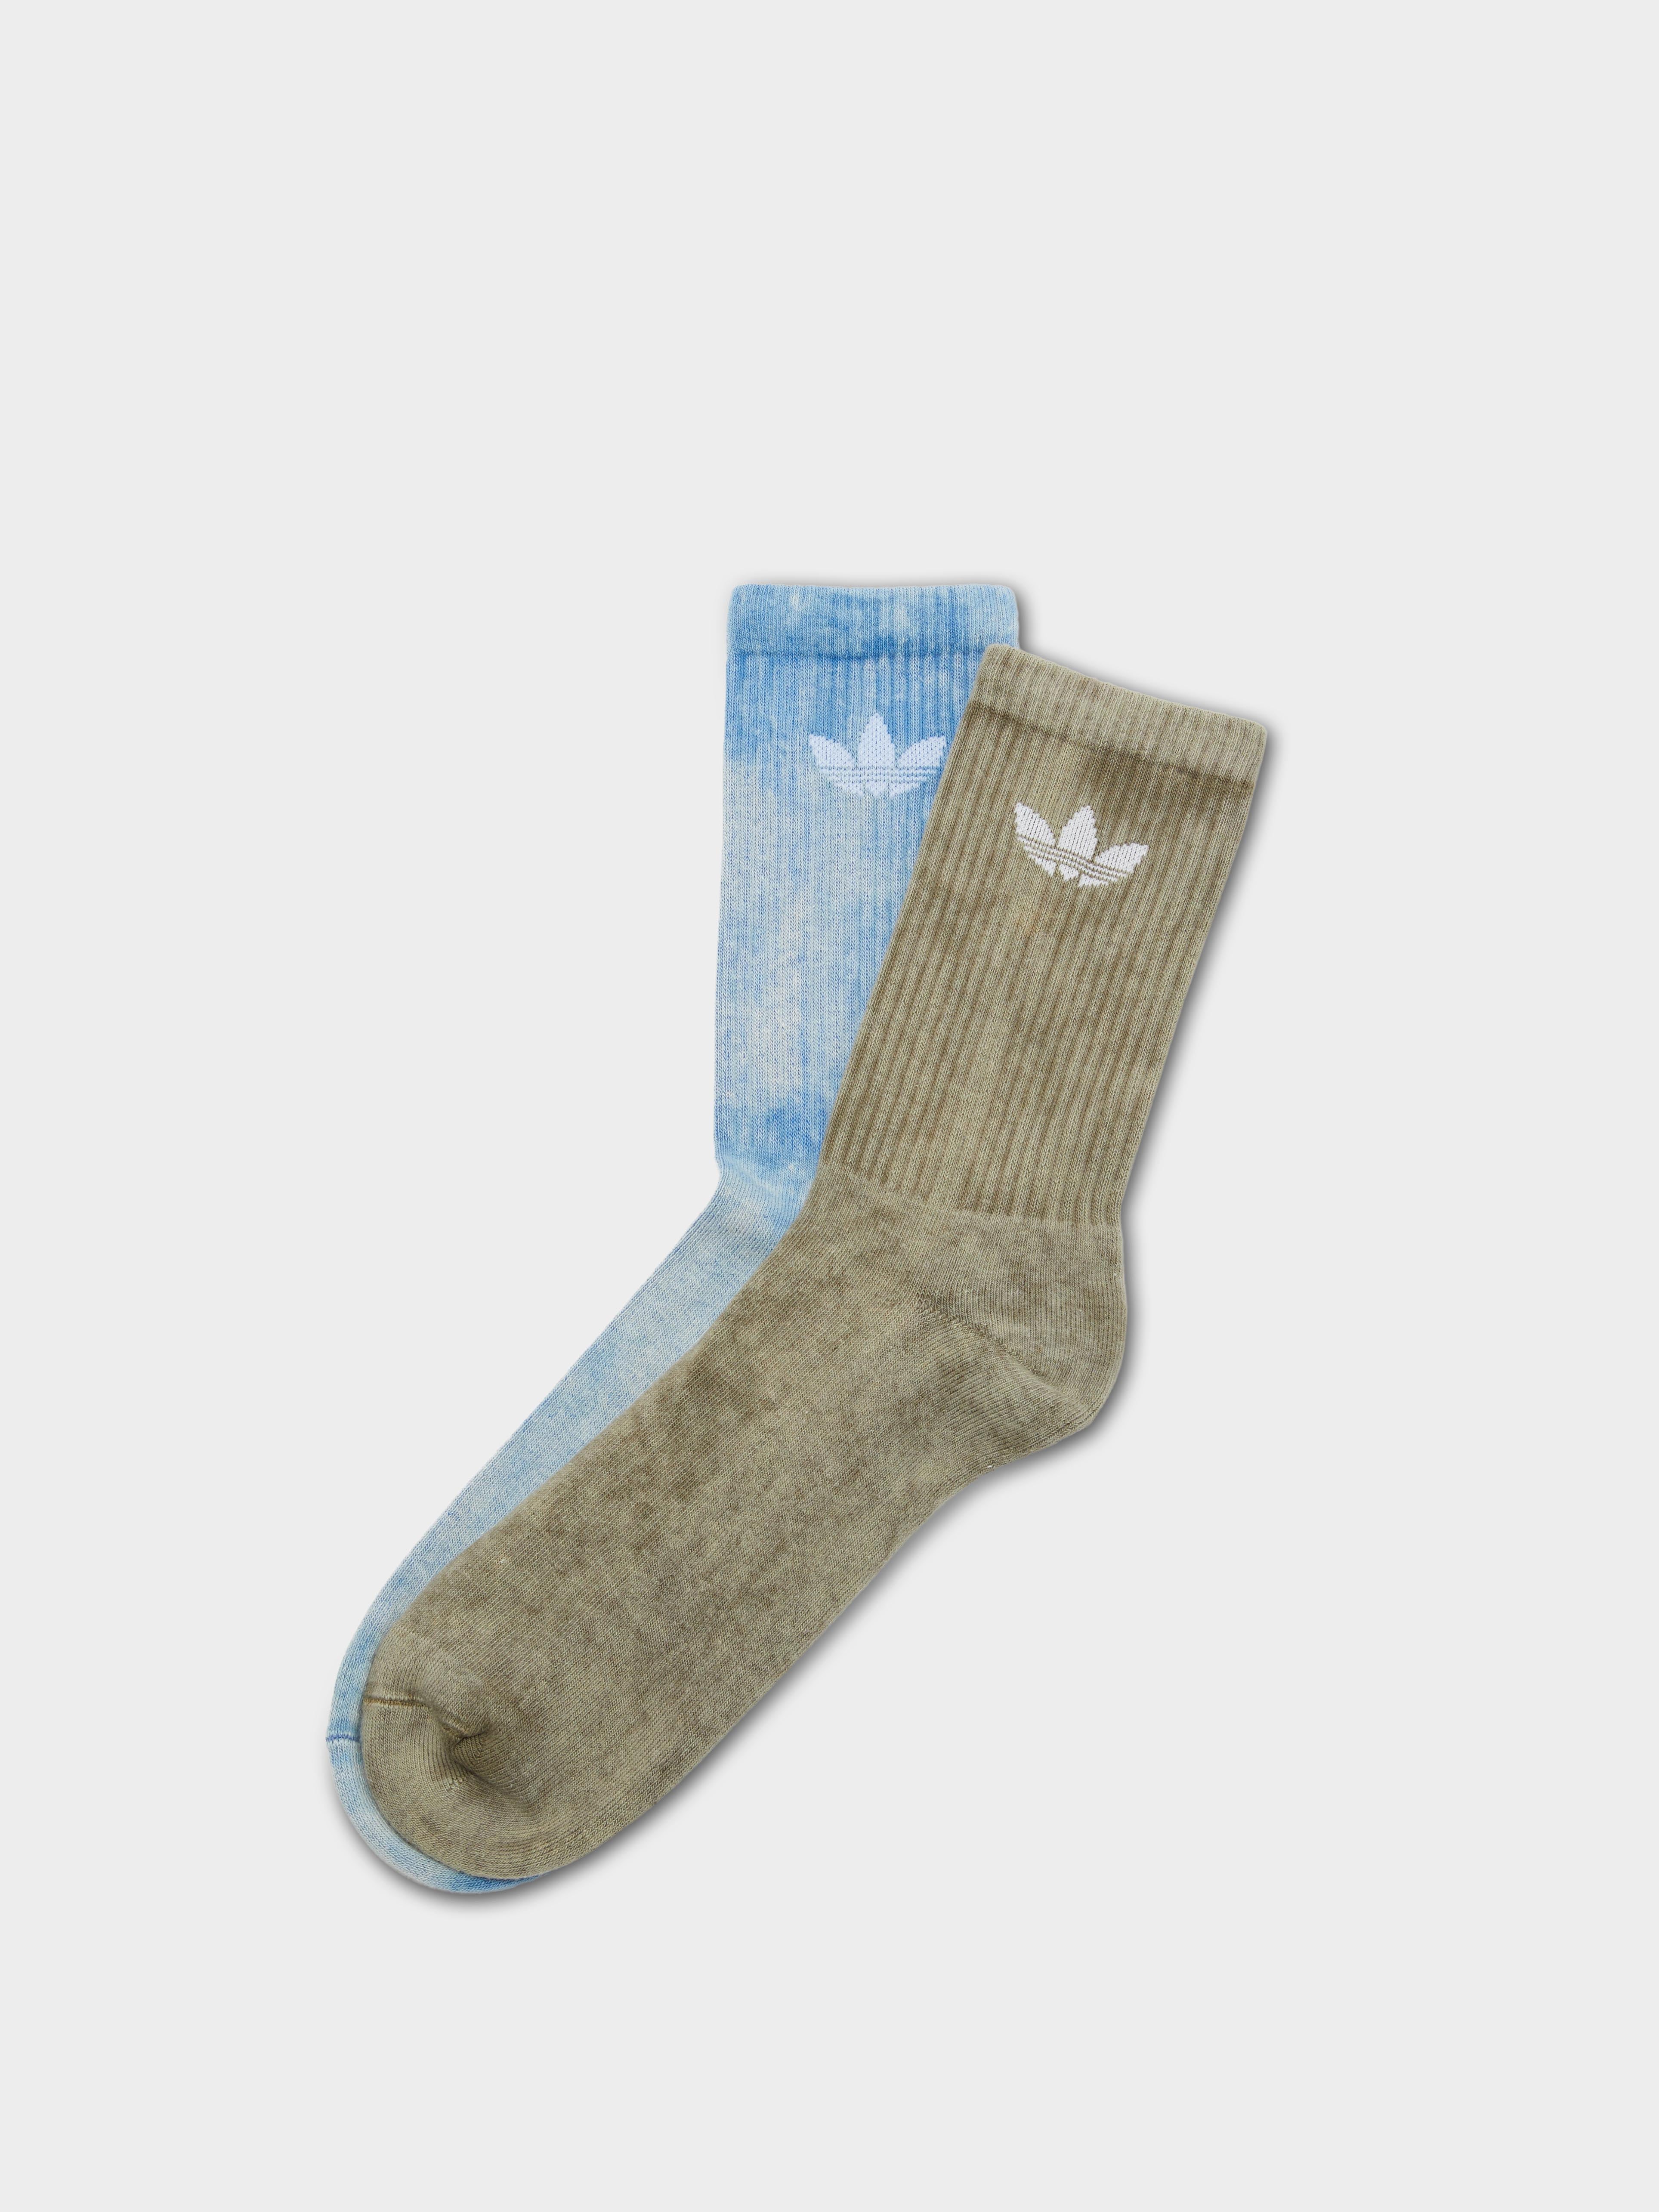 2 Pairs of Adventure Socks in Olive Strata & Blue